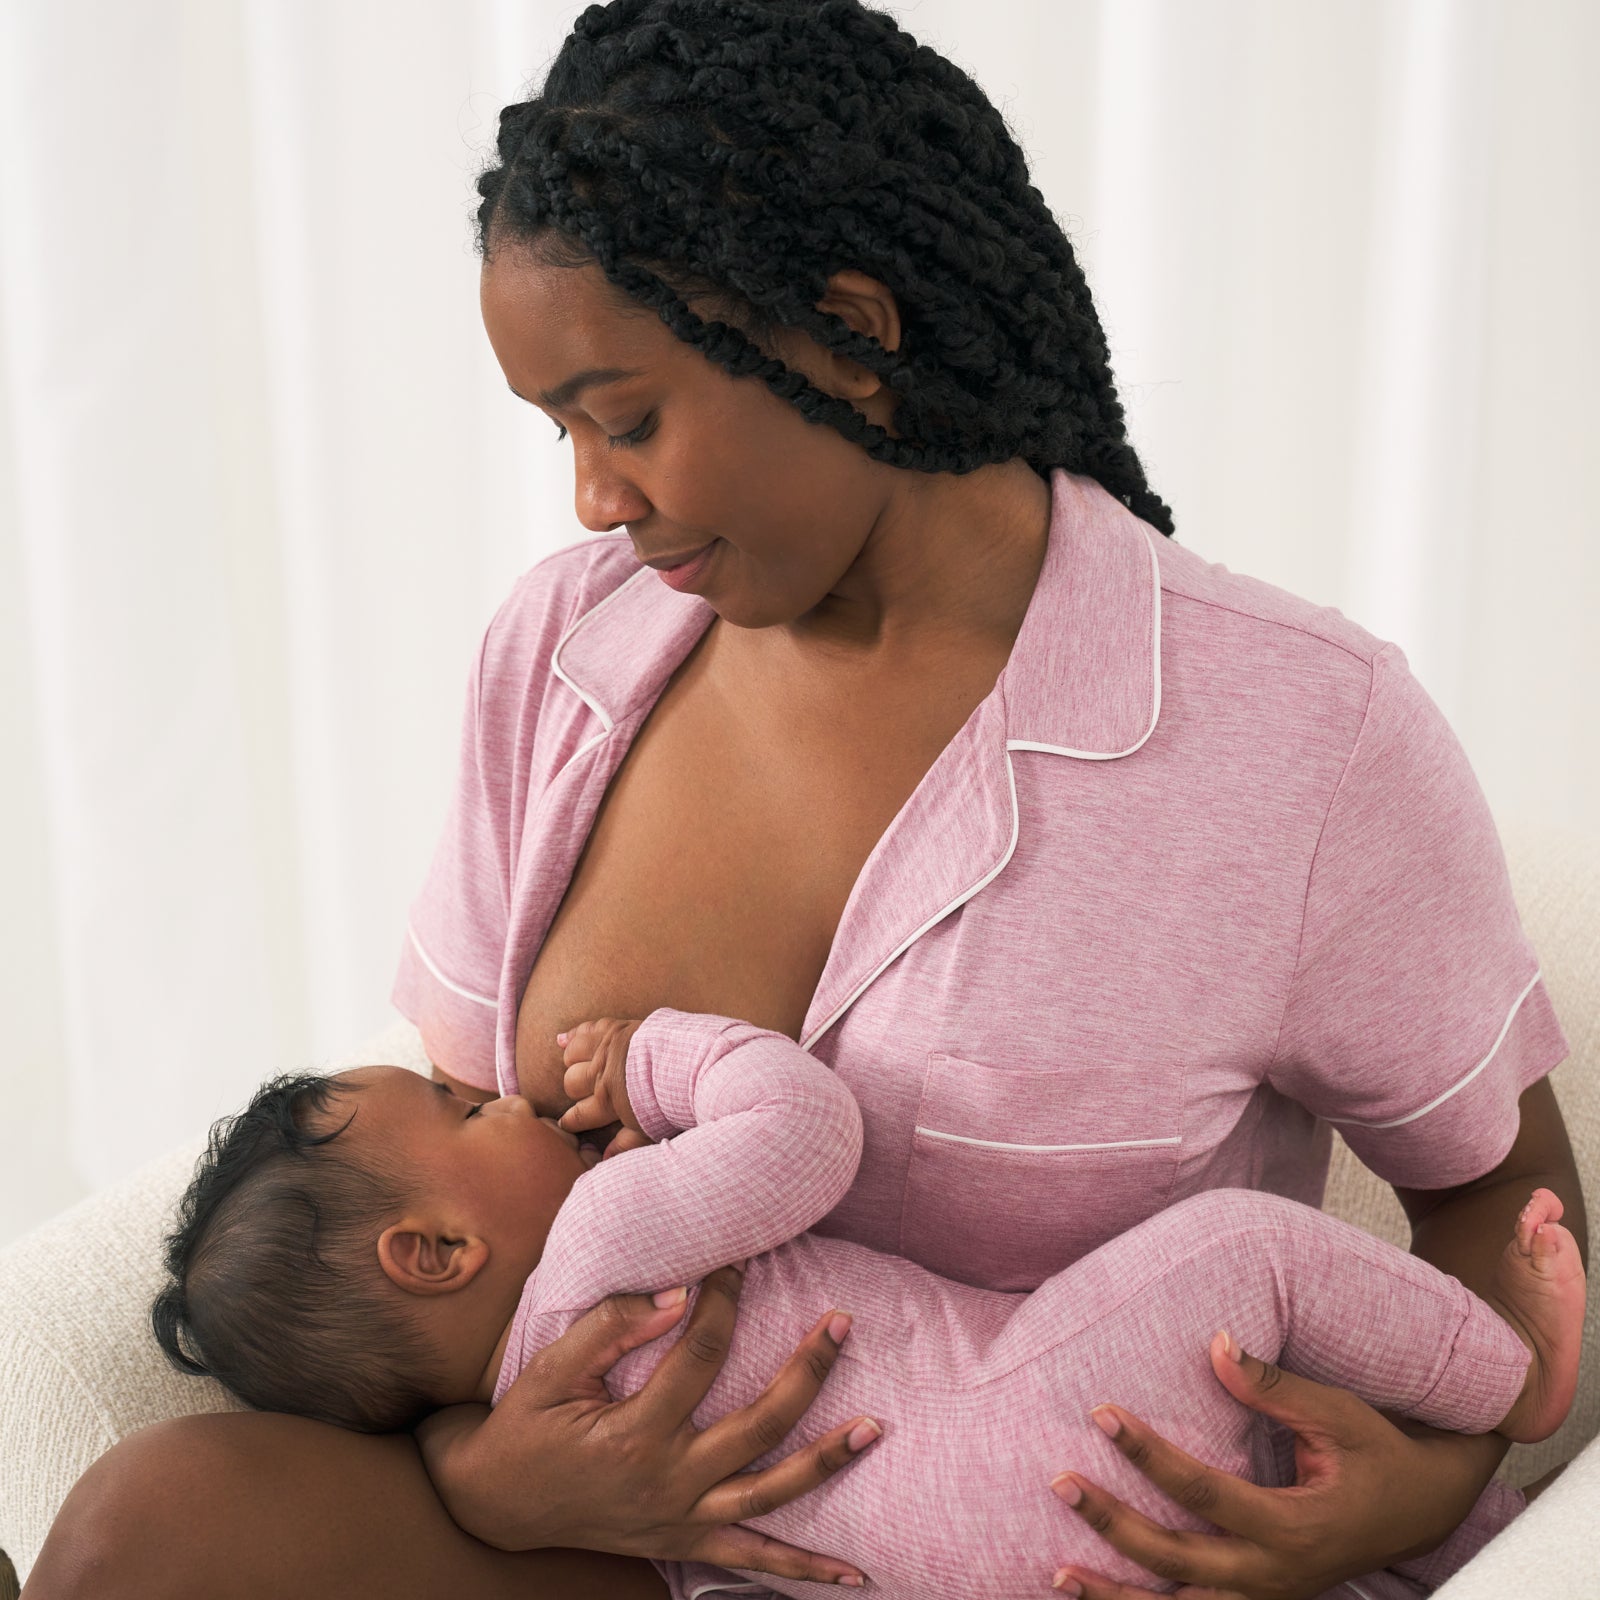 woman wearing a Heather Mauve women's short sleeve and shorts pajama set breast feeding her cild who is wearing a matching Heather Mauve zippy